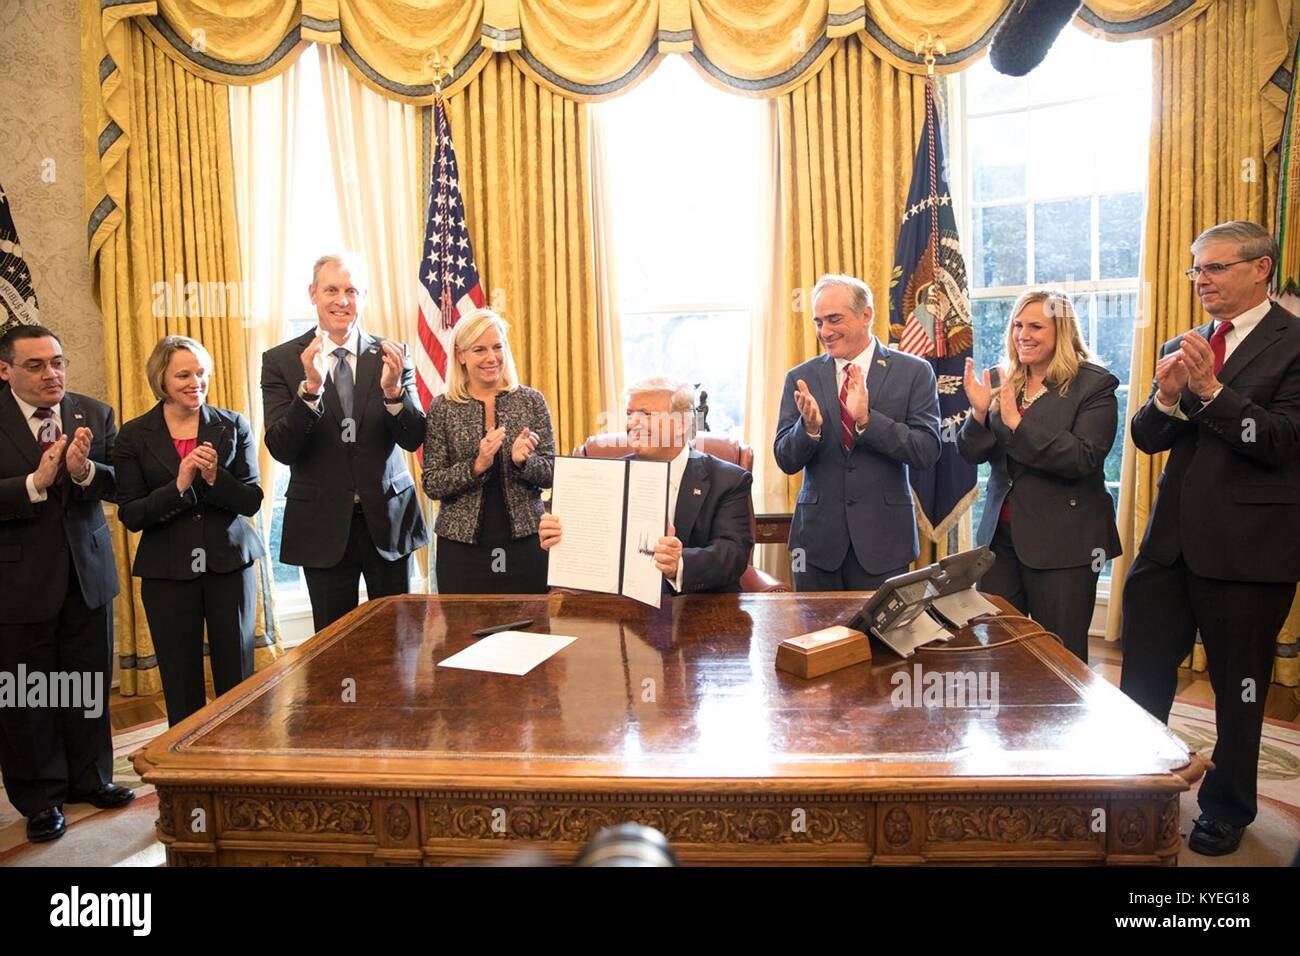 U.S. President Donald Trump holds up the signed executive order to Support our Veterans during their Transition from Uniformed Service to Civilian Life, during a ceremony in the Oval Office of the White House January 9, 2018 in Washington, DC.  Standing with the president is Homeland Security Secretary Kirstjen Nielsen, left, and Veterans Affairs Secretary David Shulkin, right. Stock Photo